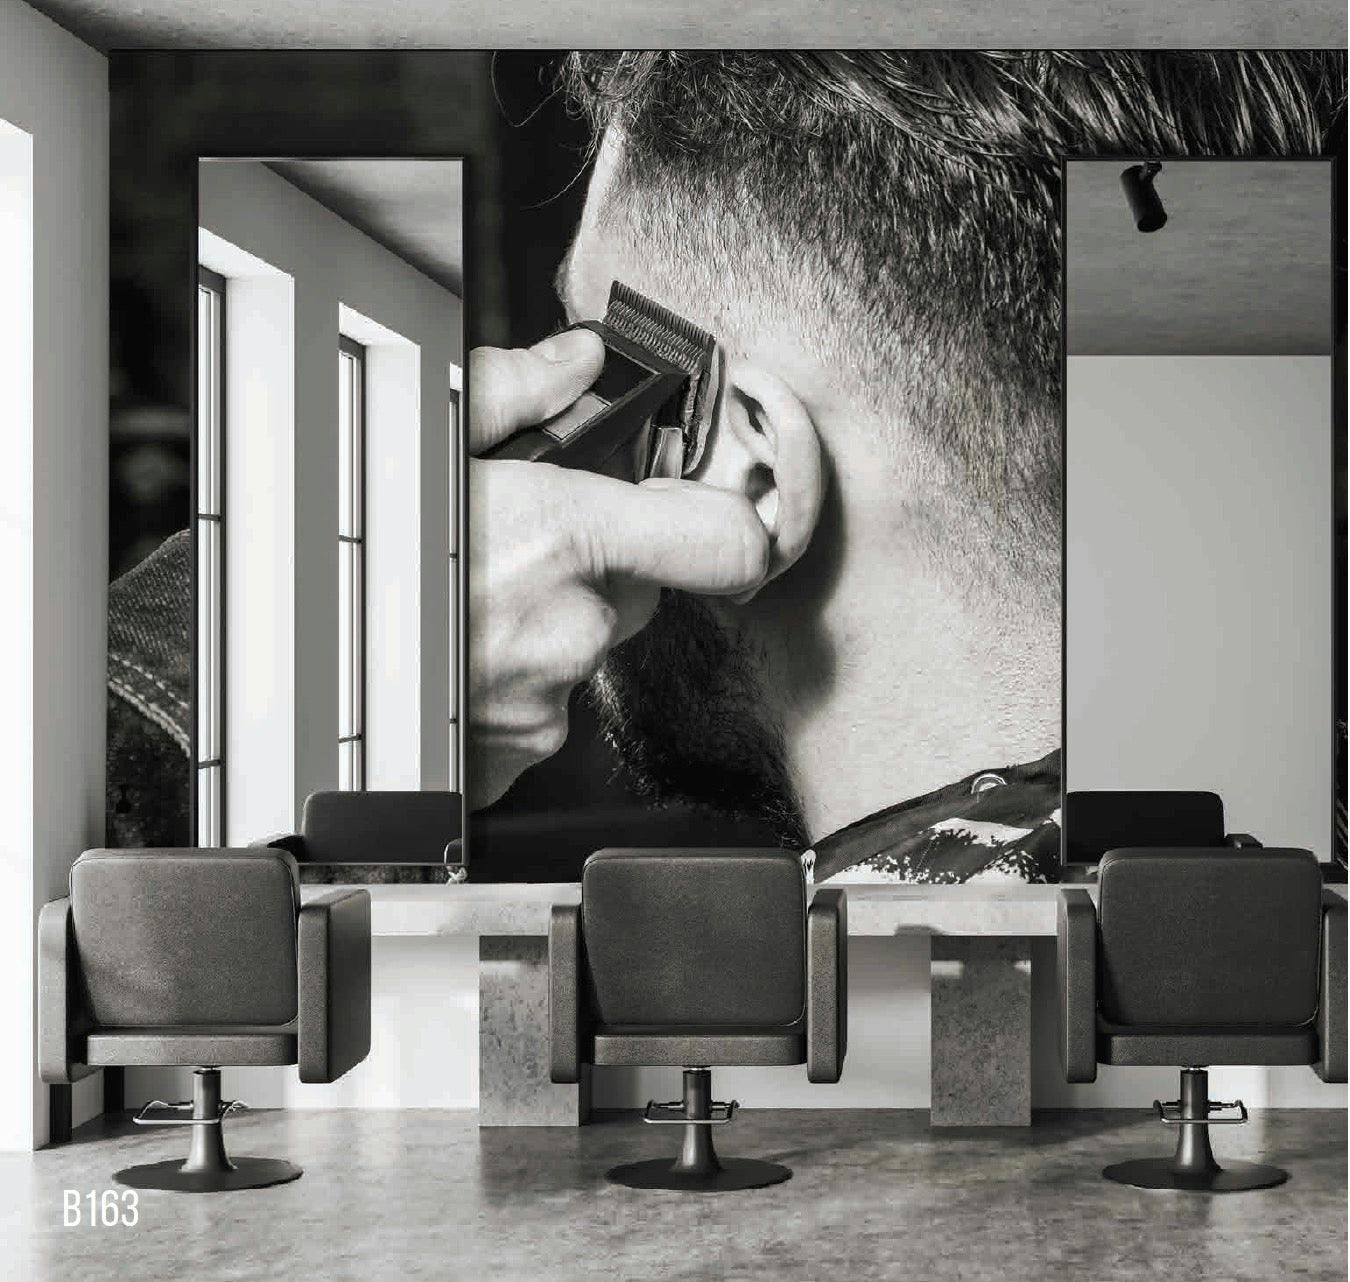 High-Quality Fiber Canvas Mural: Expertly Shaved Gentleman with Clippers - Seamless and Lifelike Portrayal | Elegance Wallpaper